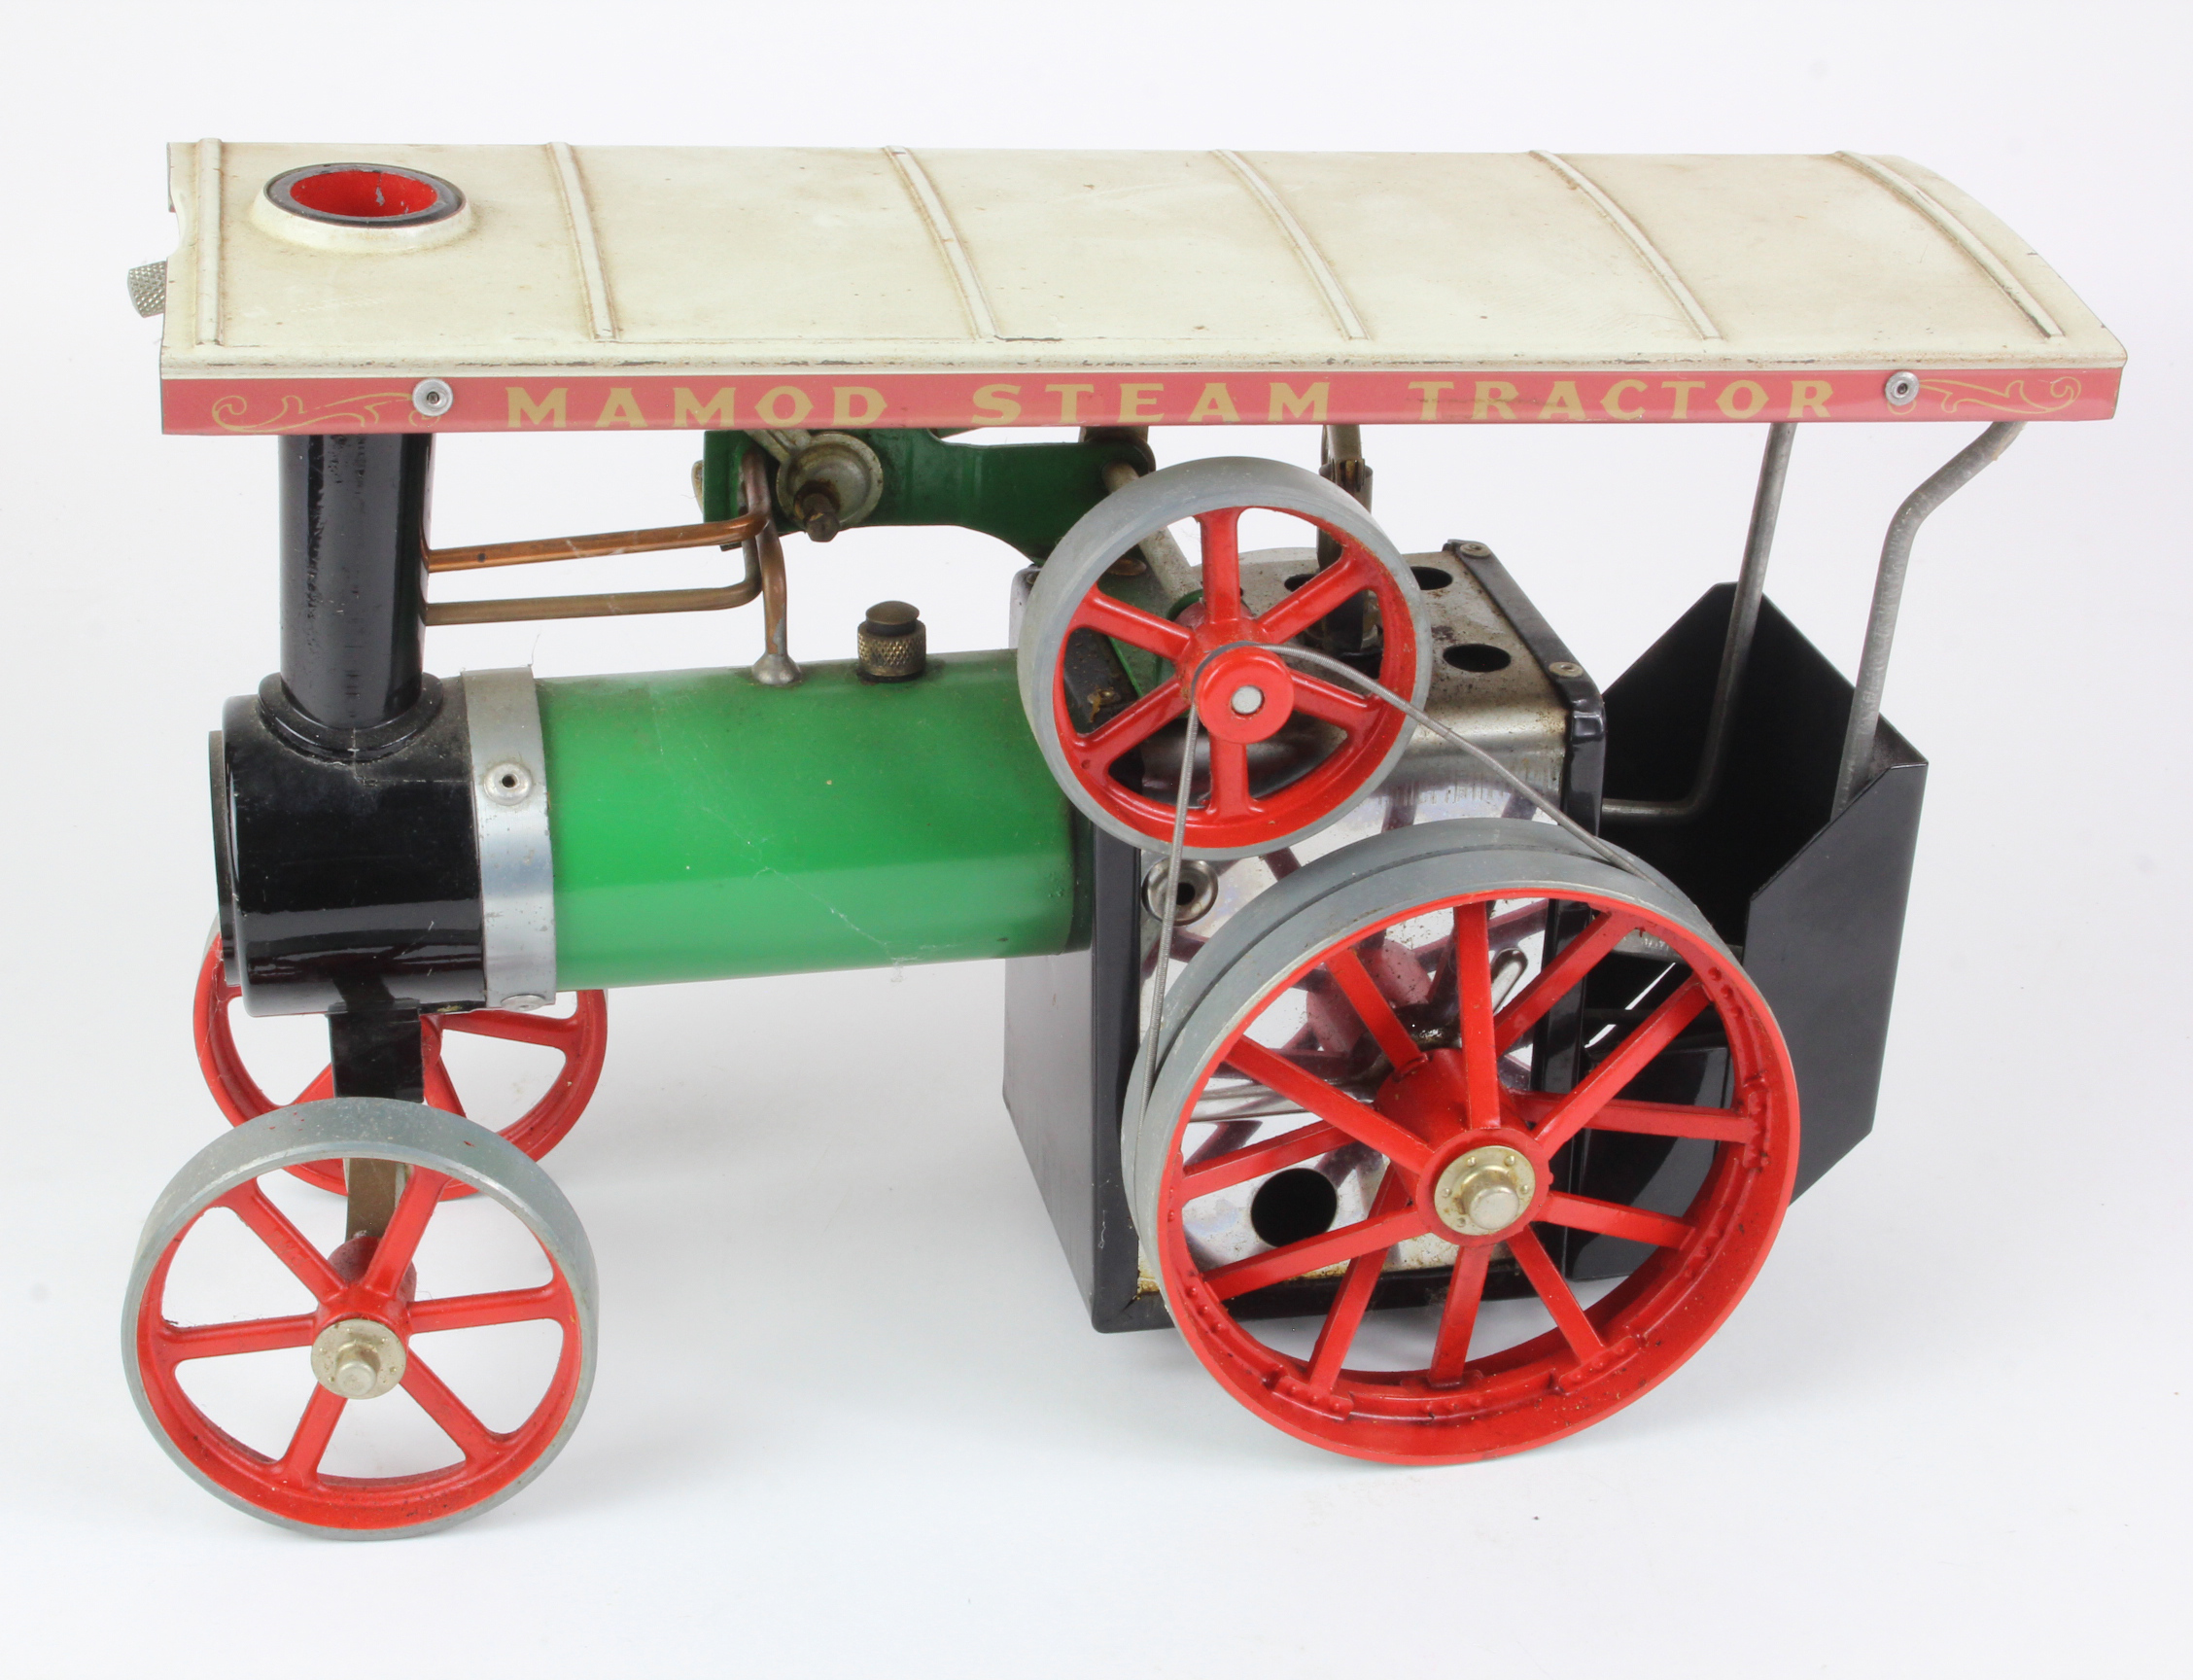 Mamod TE1A live steam tractor, with burner, height 16cm, length 26cm approx.